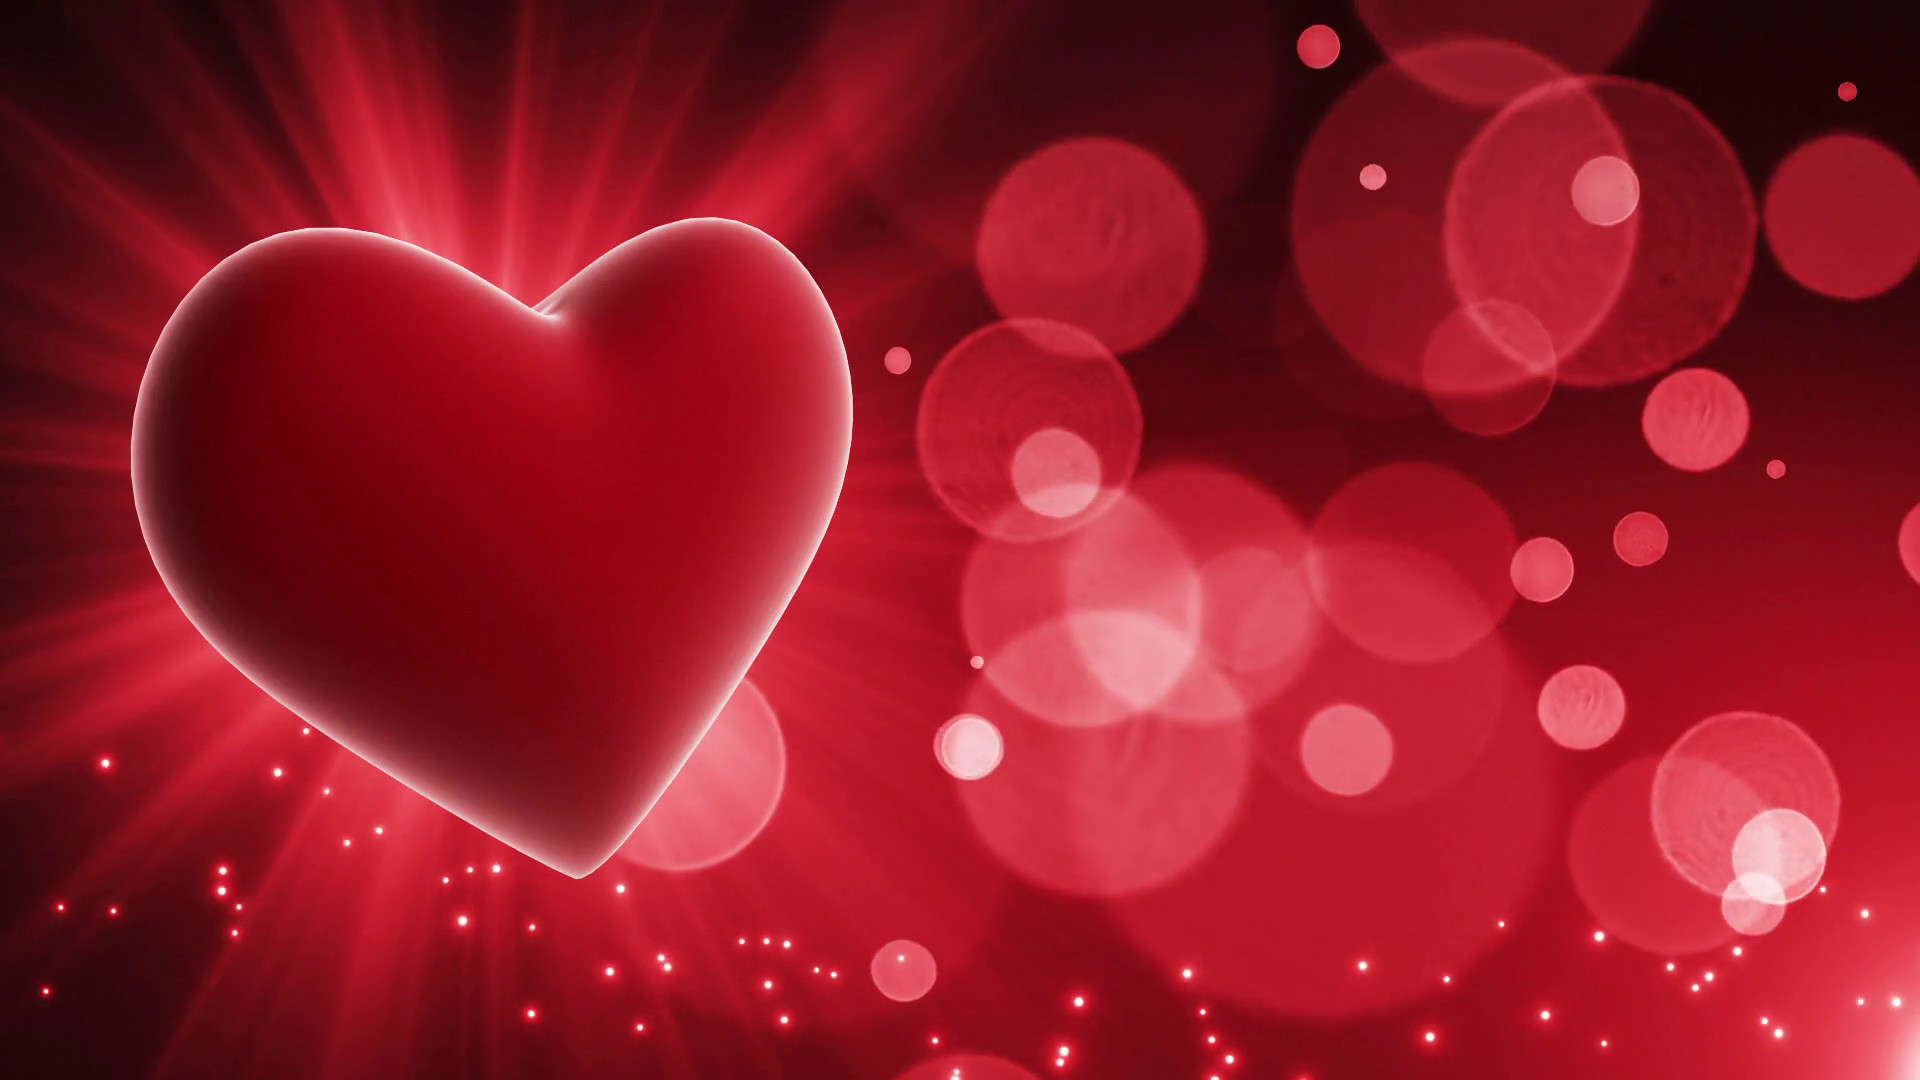 1920x1080 Glowing Heart Party Themed Loopable Motion Background with Glowing  Particles and Bokeh Red | Happy Anniversary Wishes Backdrop | Wishing Happy  Anniversary ...